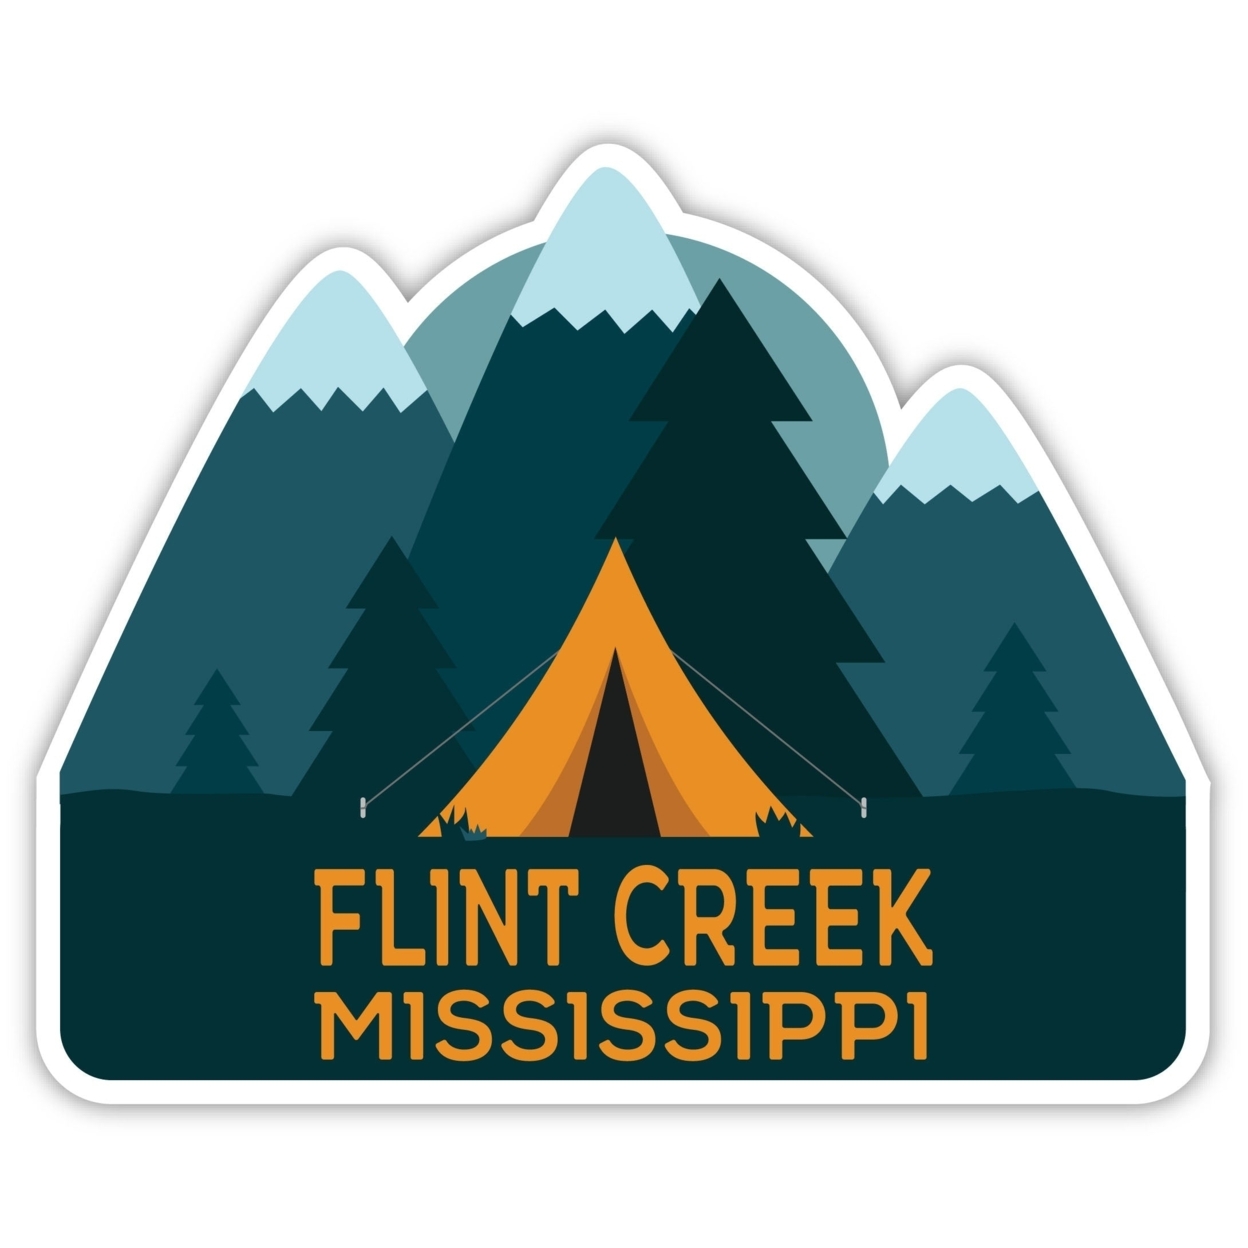 Flint Creek Mississippi Souvenir Decorative Stickers (Choose Theme And Size) - 4-Pack, 12-Inch, Tent